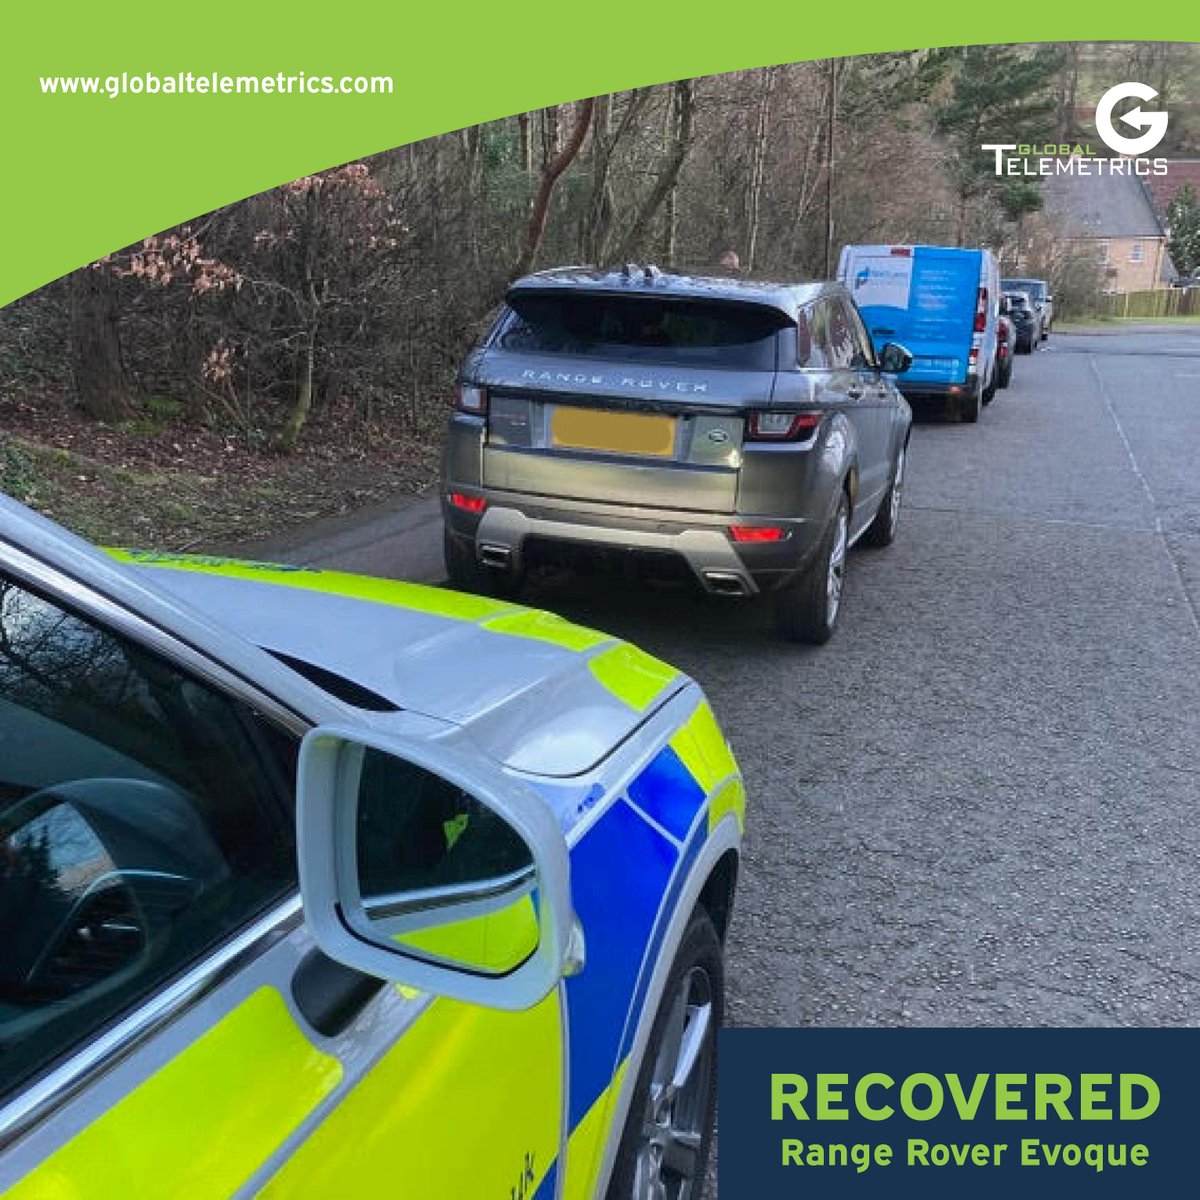 30 mins after getting confirmation this Range Rover Evoque was stolen, our Repatriations Team and the police secured and recovered the vehicle thanks to the location provided by the SmarTrack tracking device installed.

#DisruptingCriminality #ItPaysToInvestInSecurity…